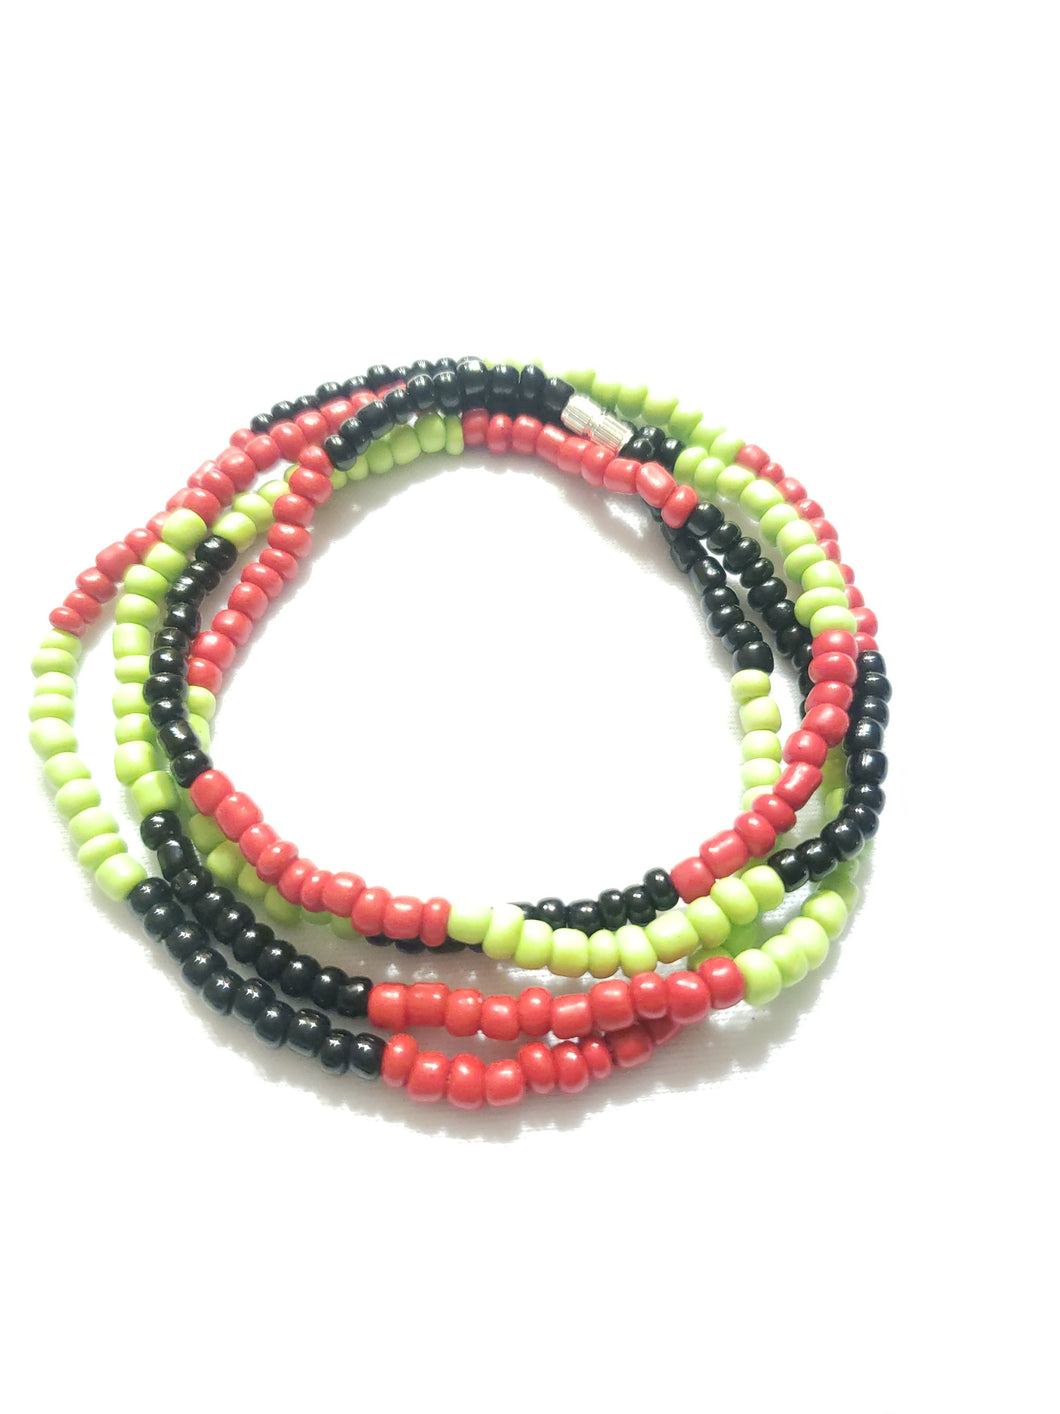 Red, Lime, Black Clasp Waist Beads